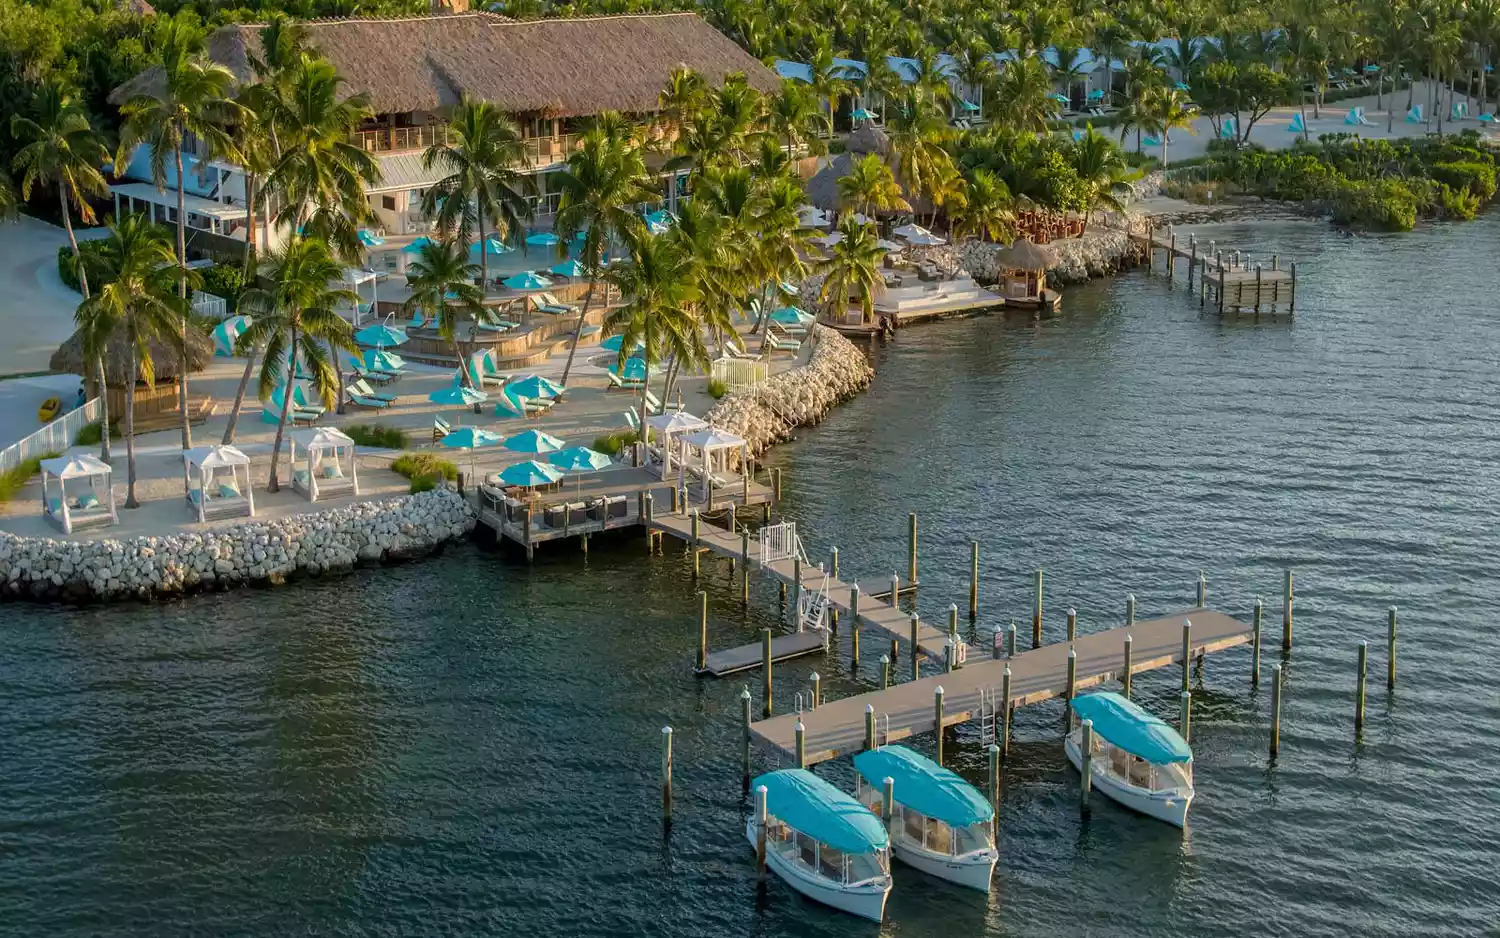 Glass-bottom kayaking and riding a floating tiki bar are both available within the only all-inclusive resort in the Florida Keys (Video)